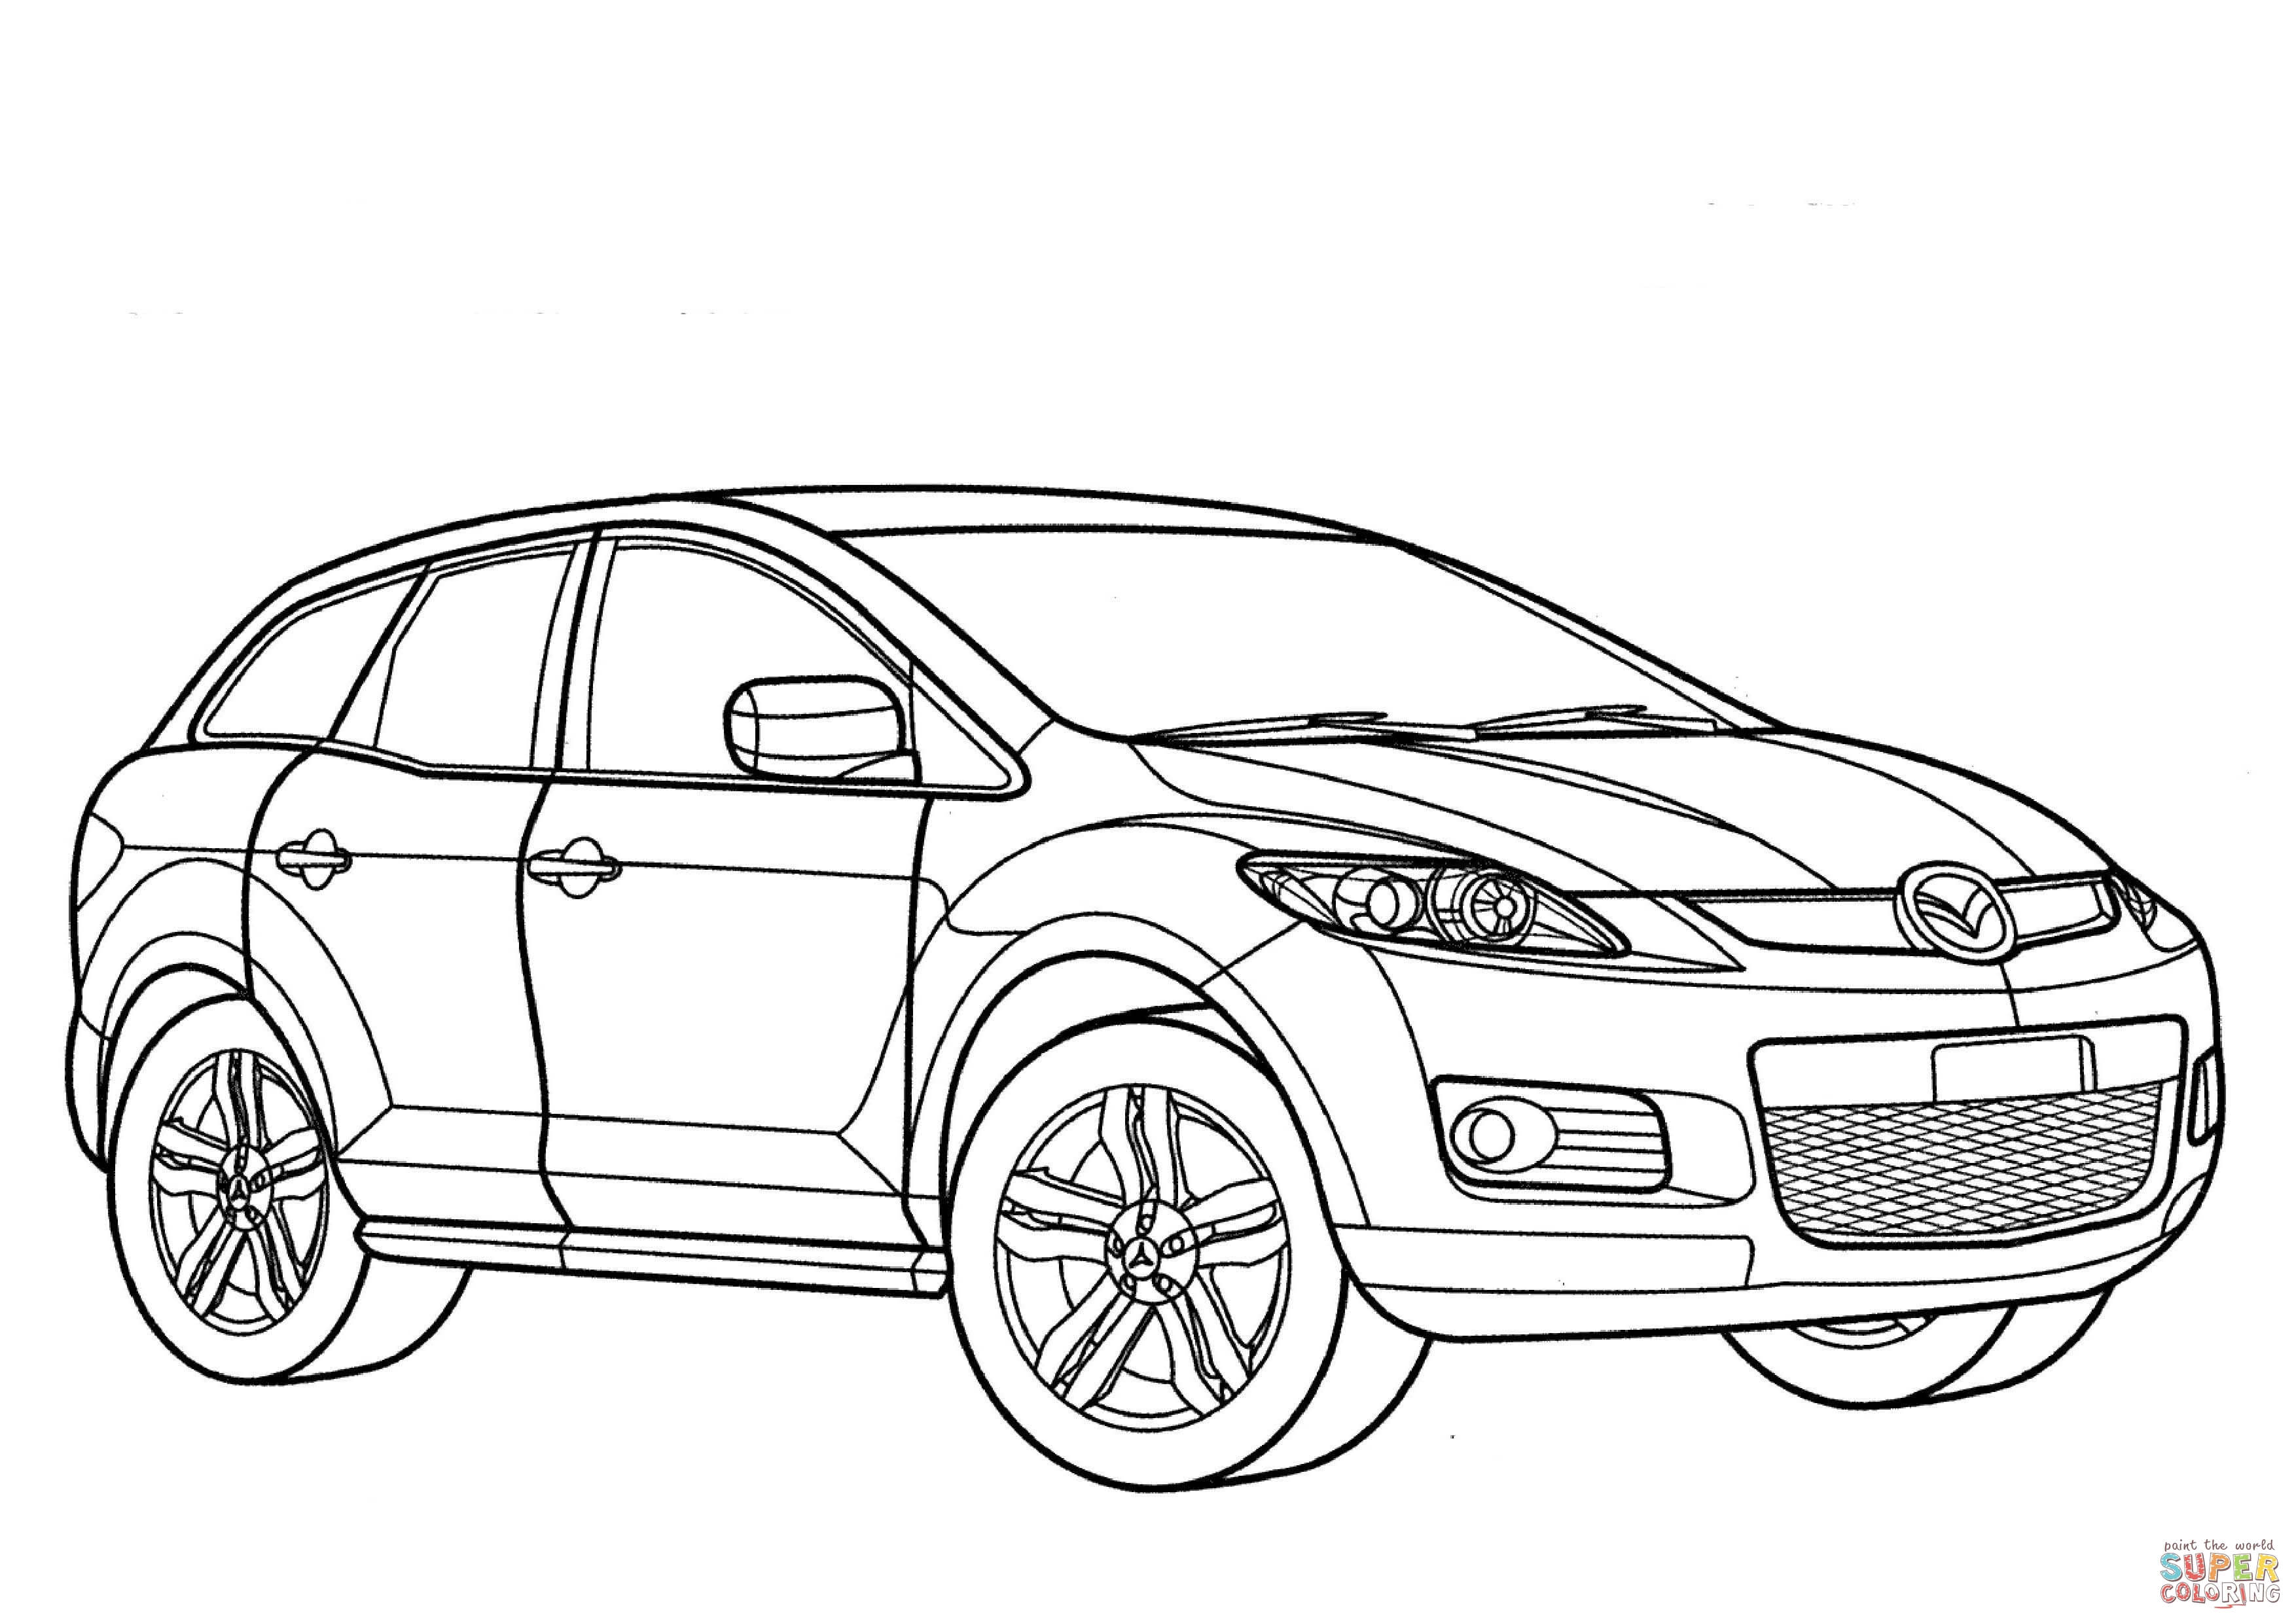 Mazda CX-7 coloring page | Free Printable Coloring Pages